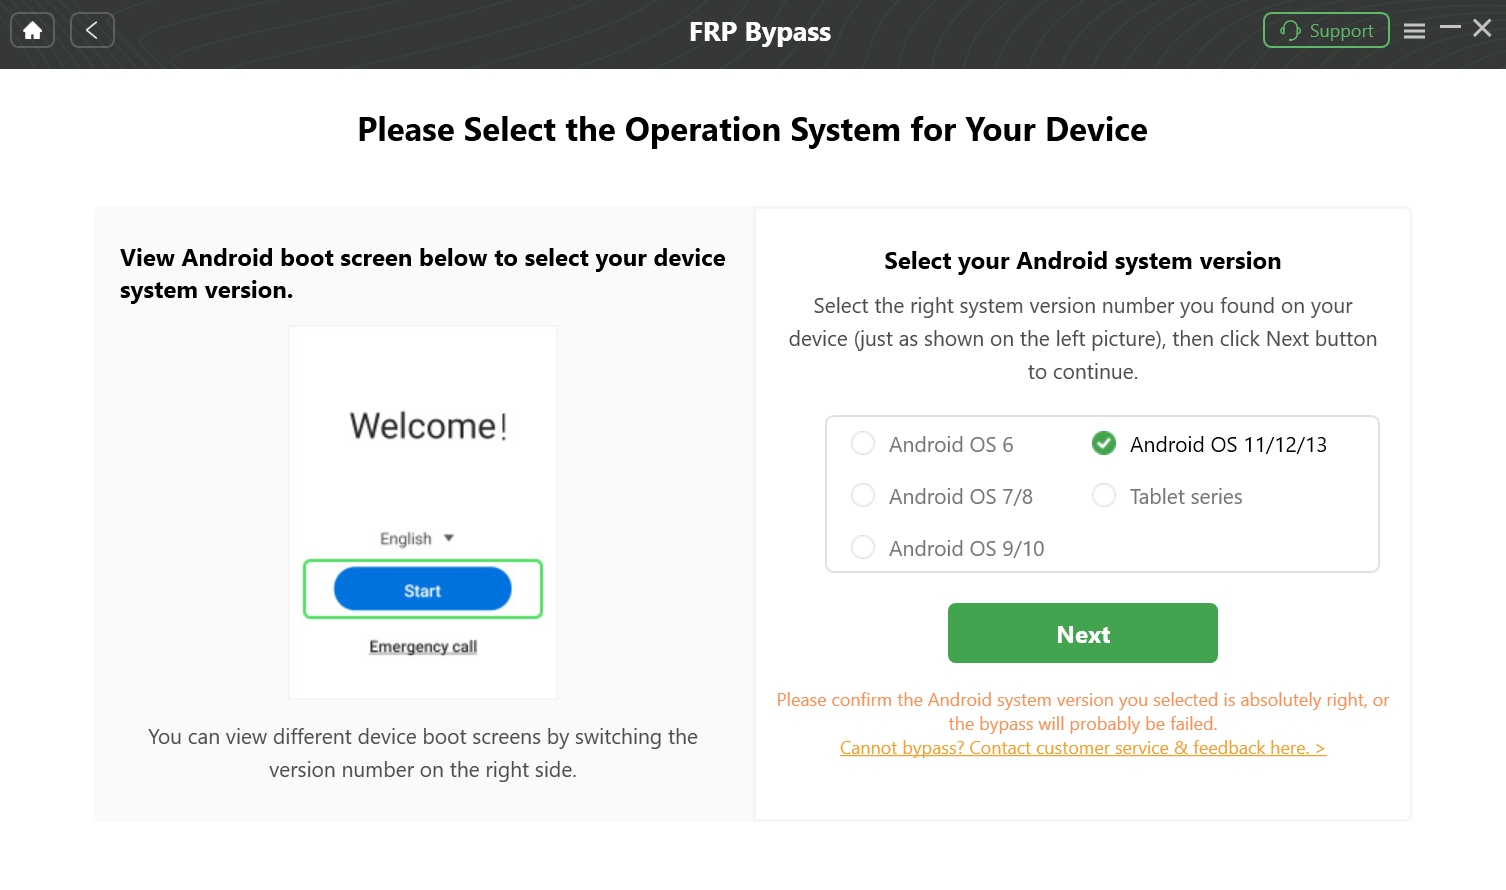 Find And Select the System Version of Your Device